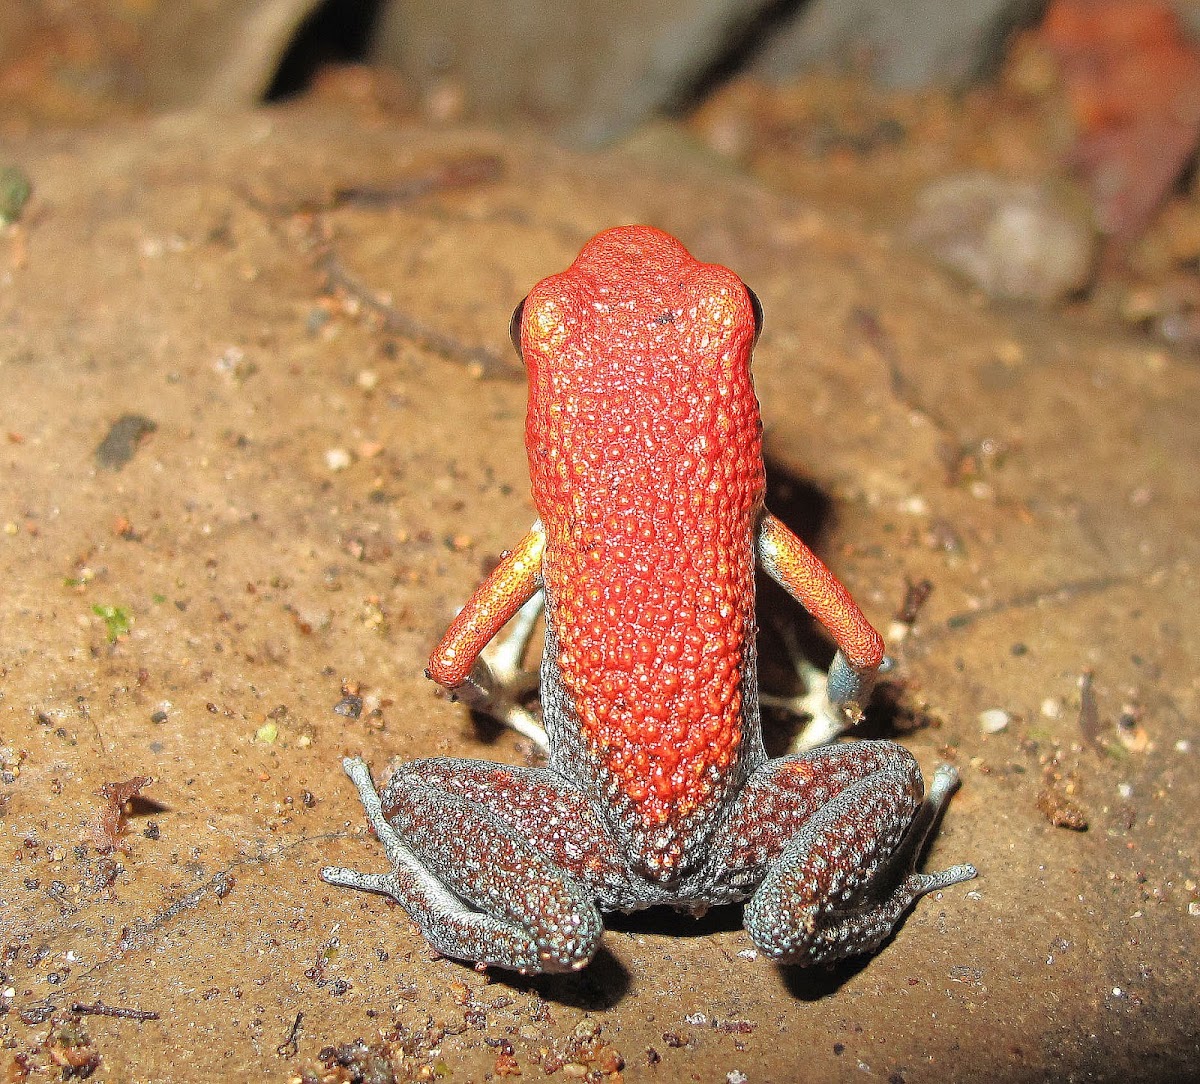 Red and Green Dart Frog